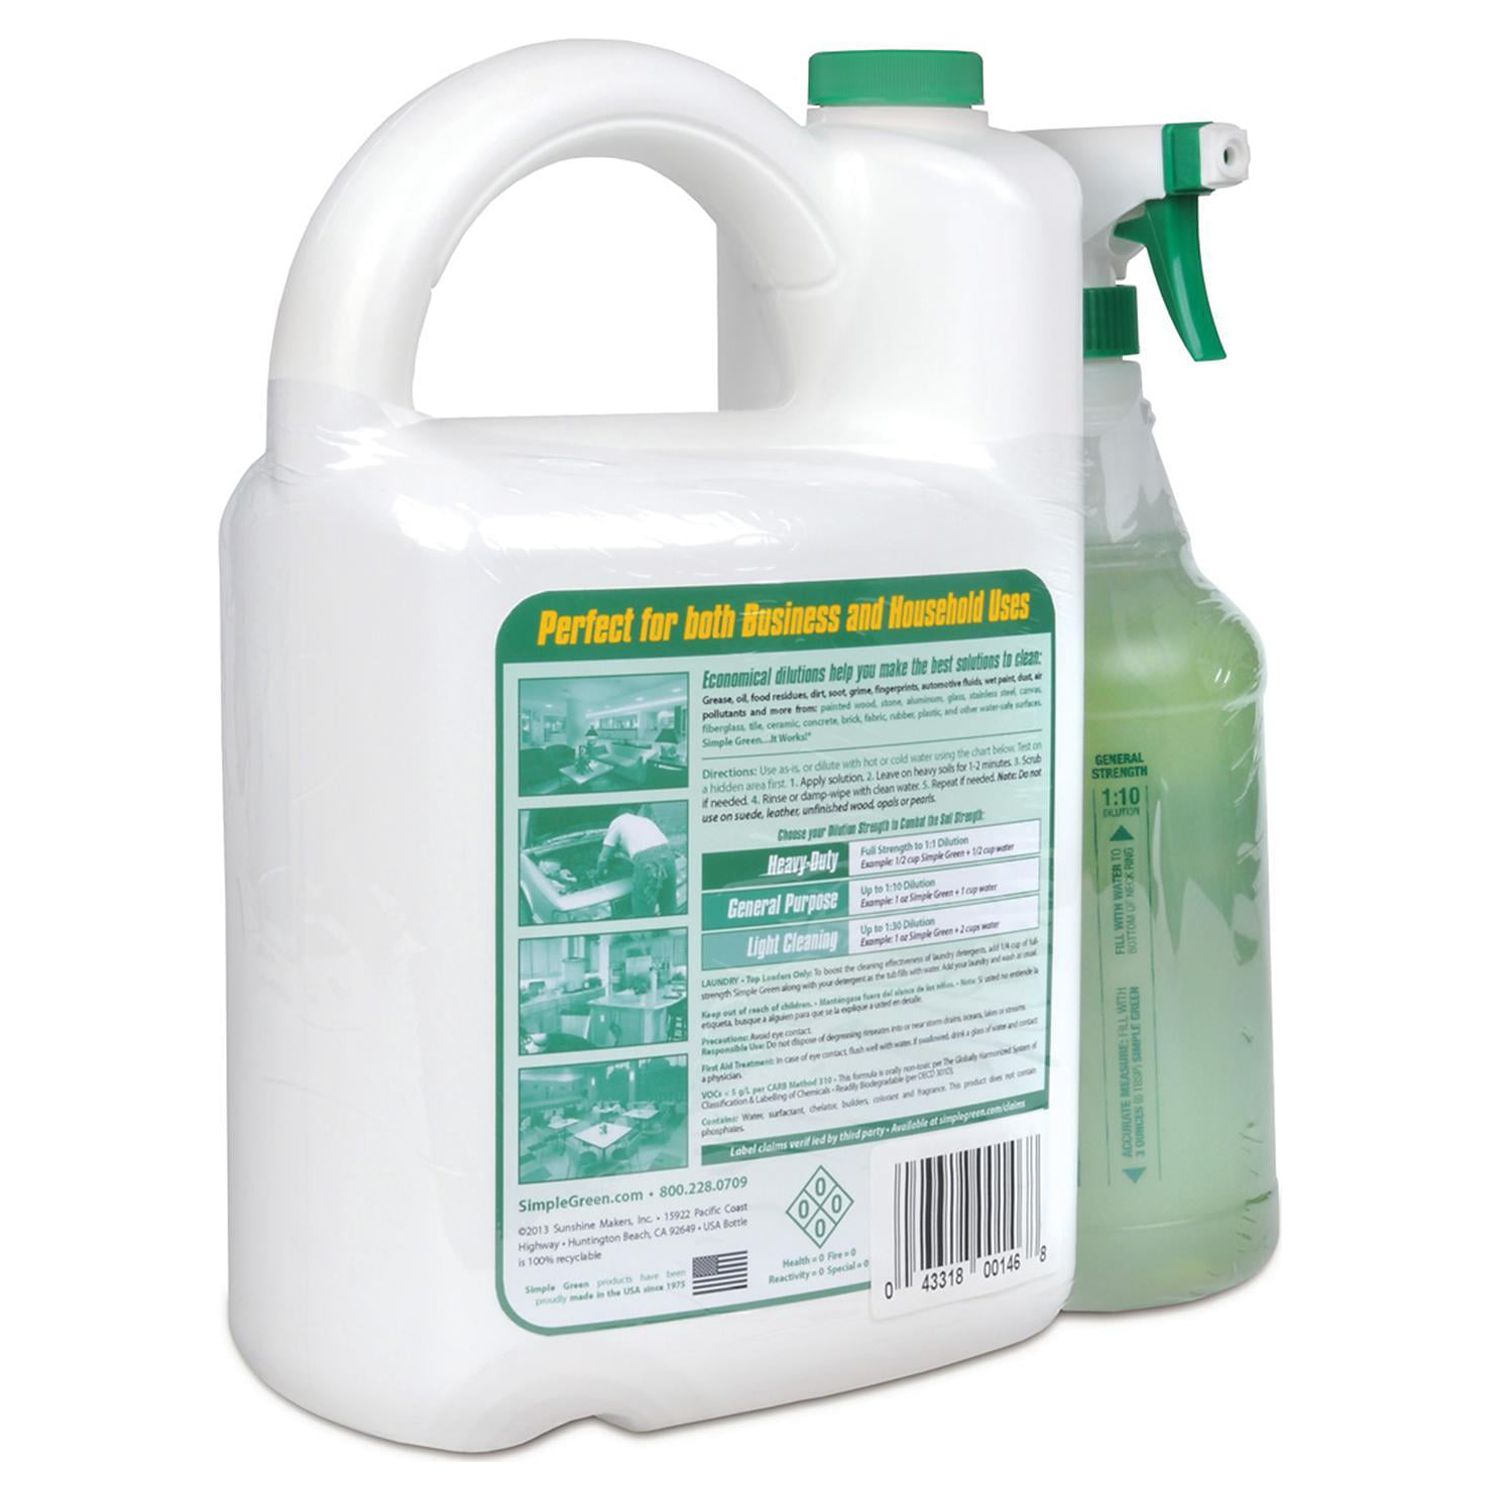 Simple Green All Purpose Cleaner Spray & Refill, 172 Oz - image 3 of 6